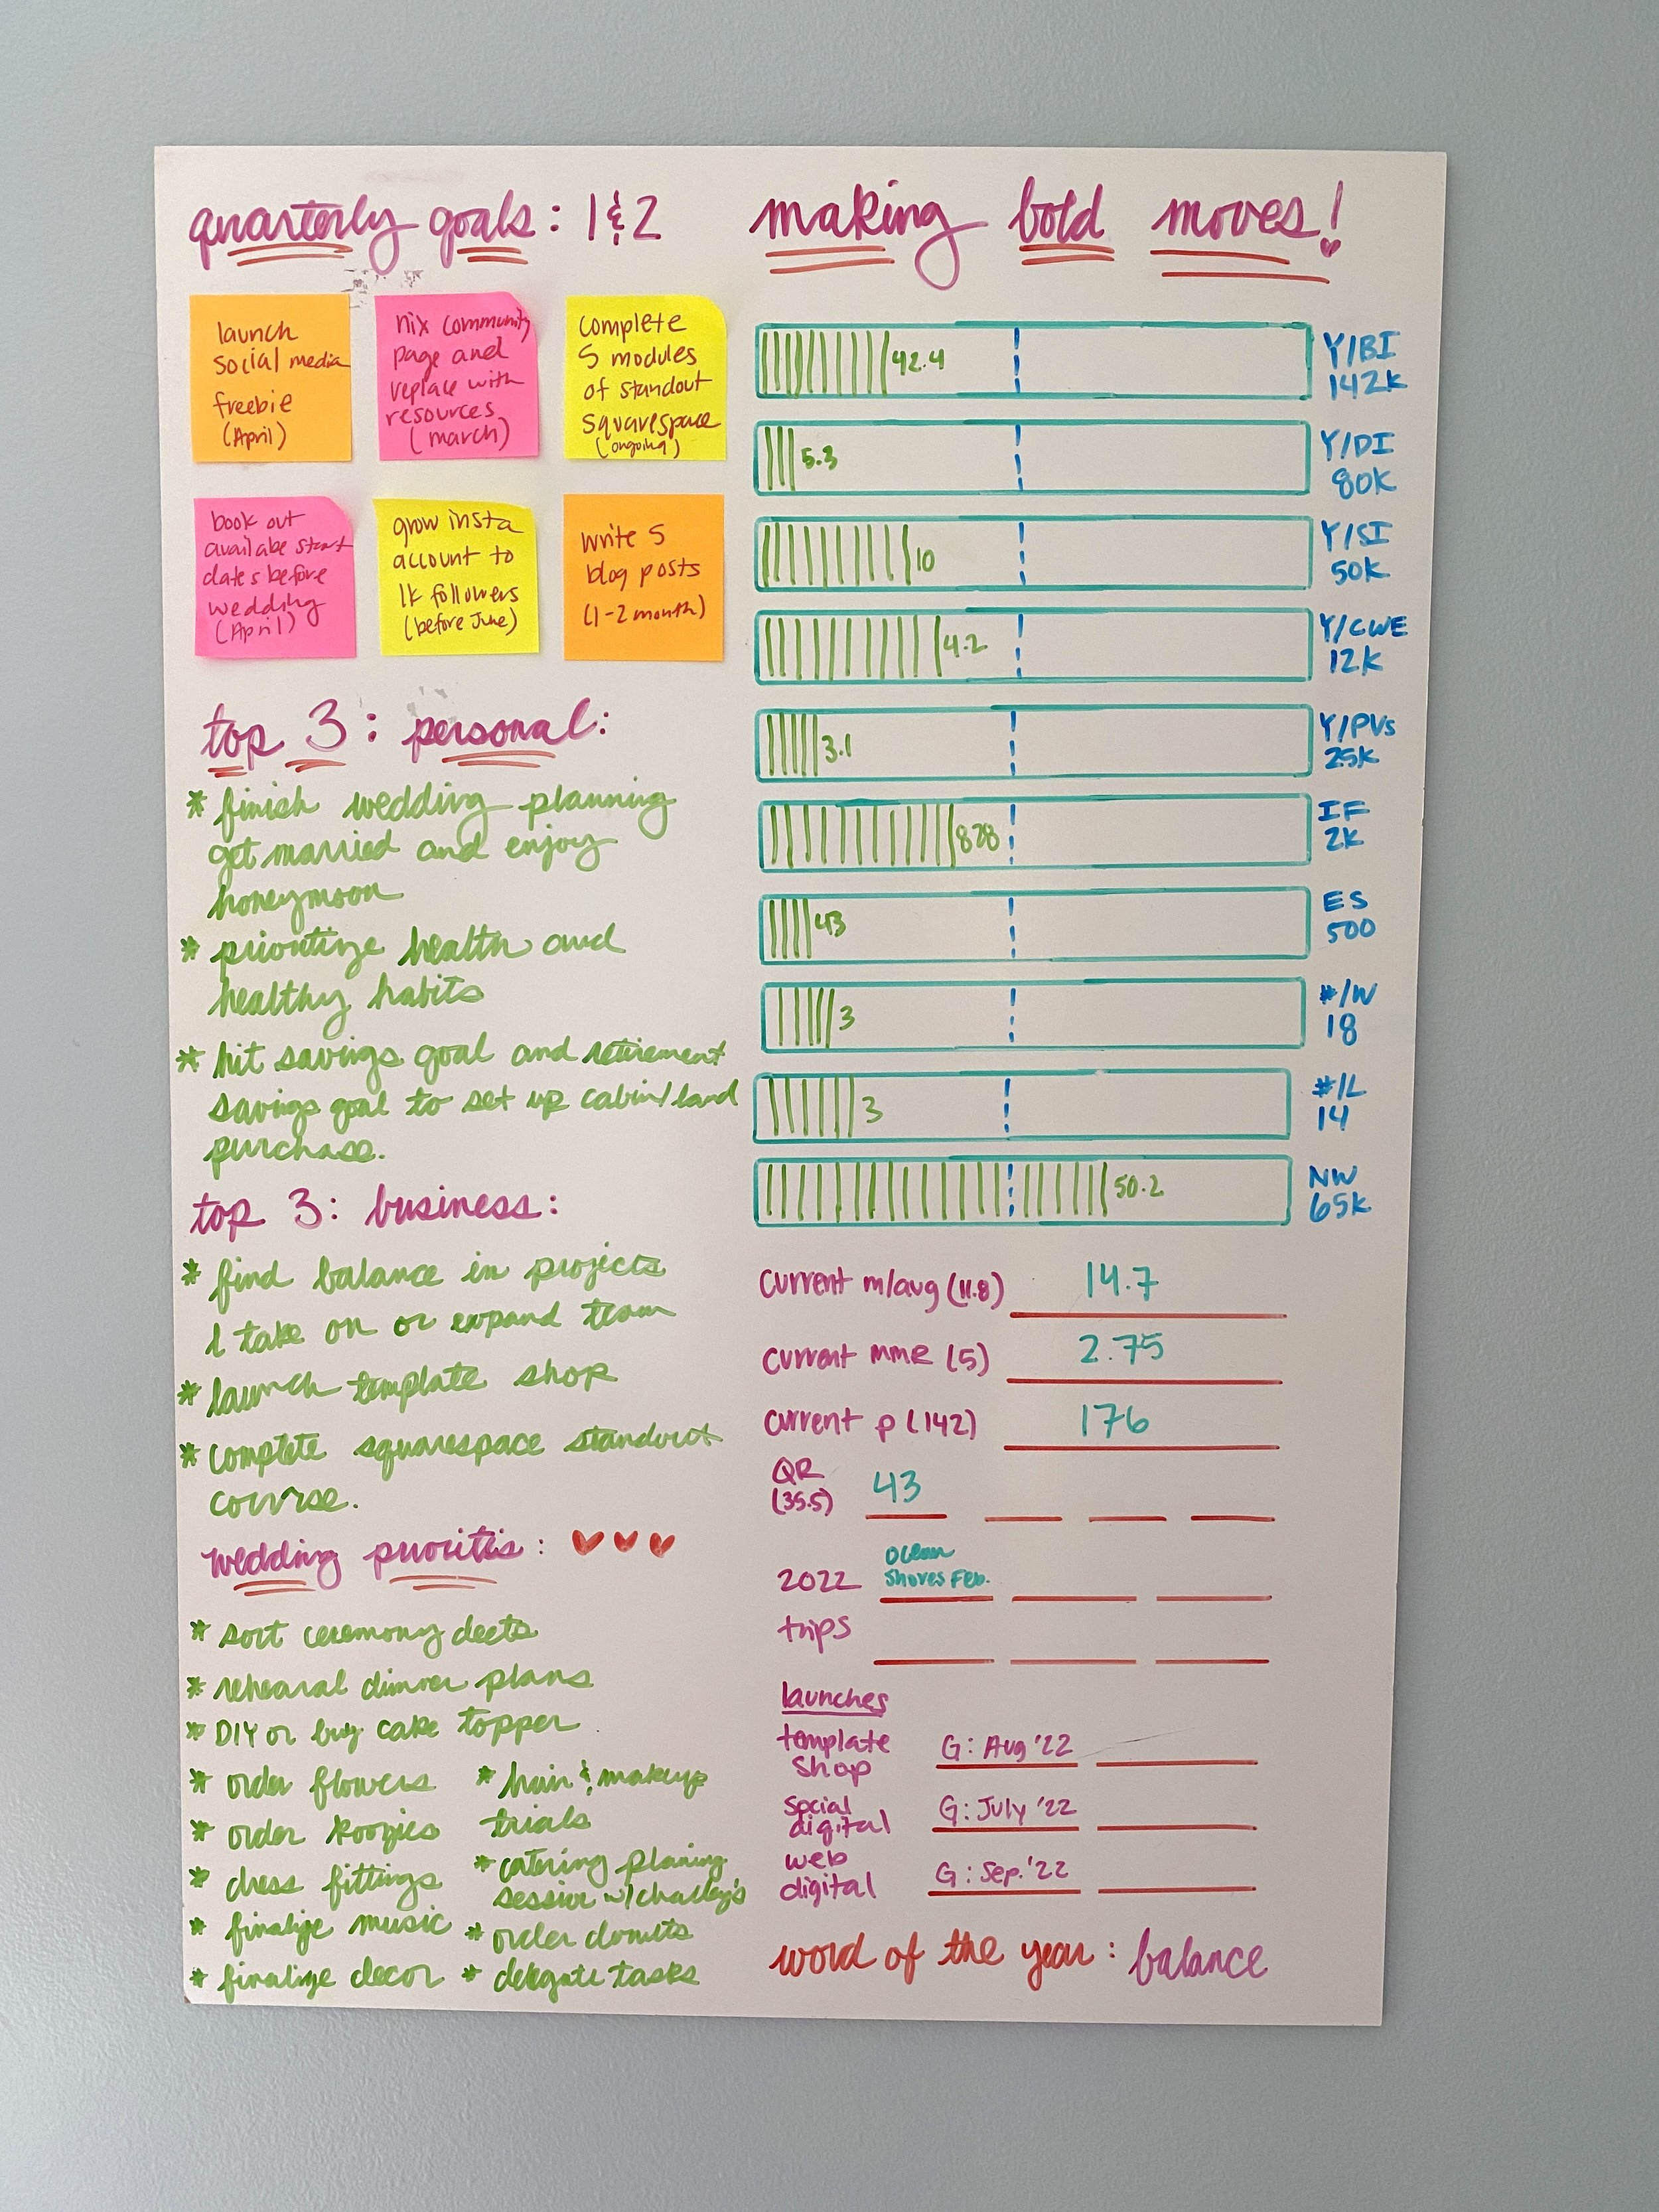 How to Track Progress on your Goals with the Whiteboard Method